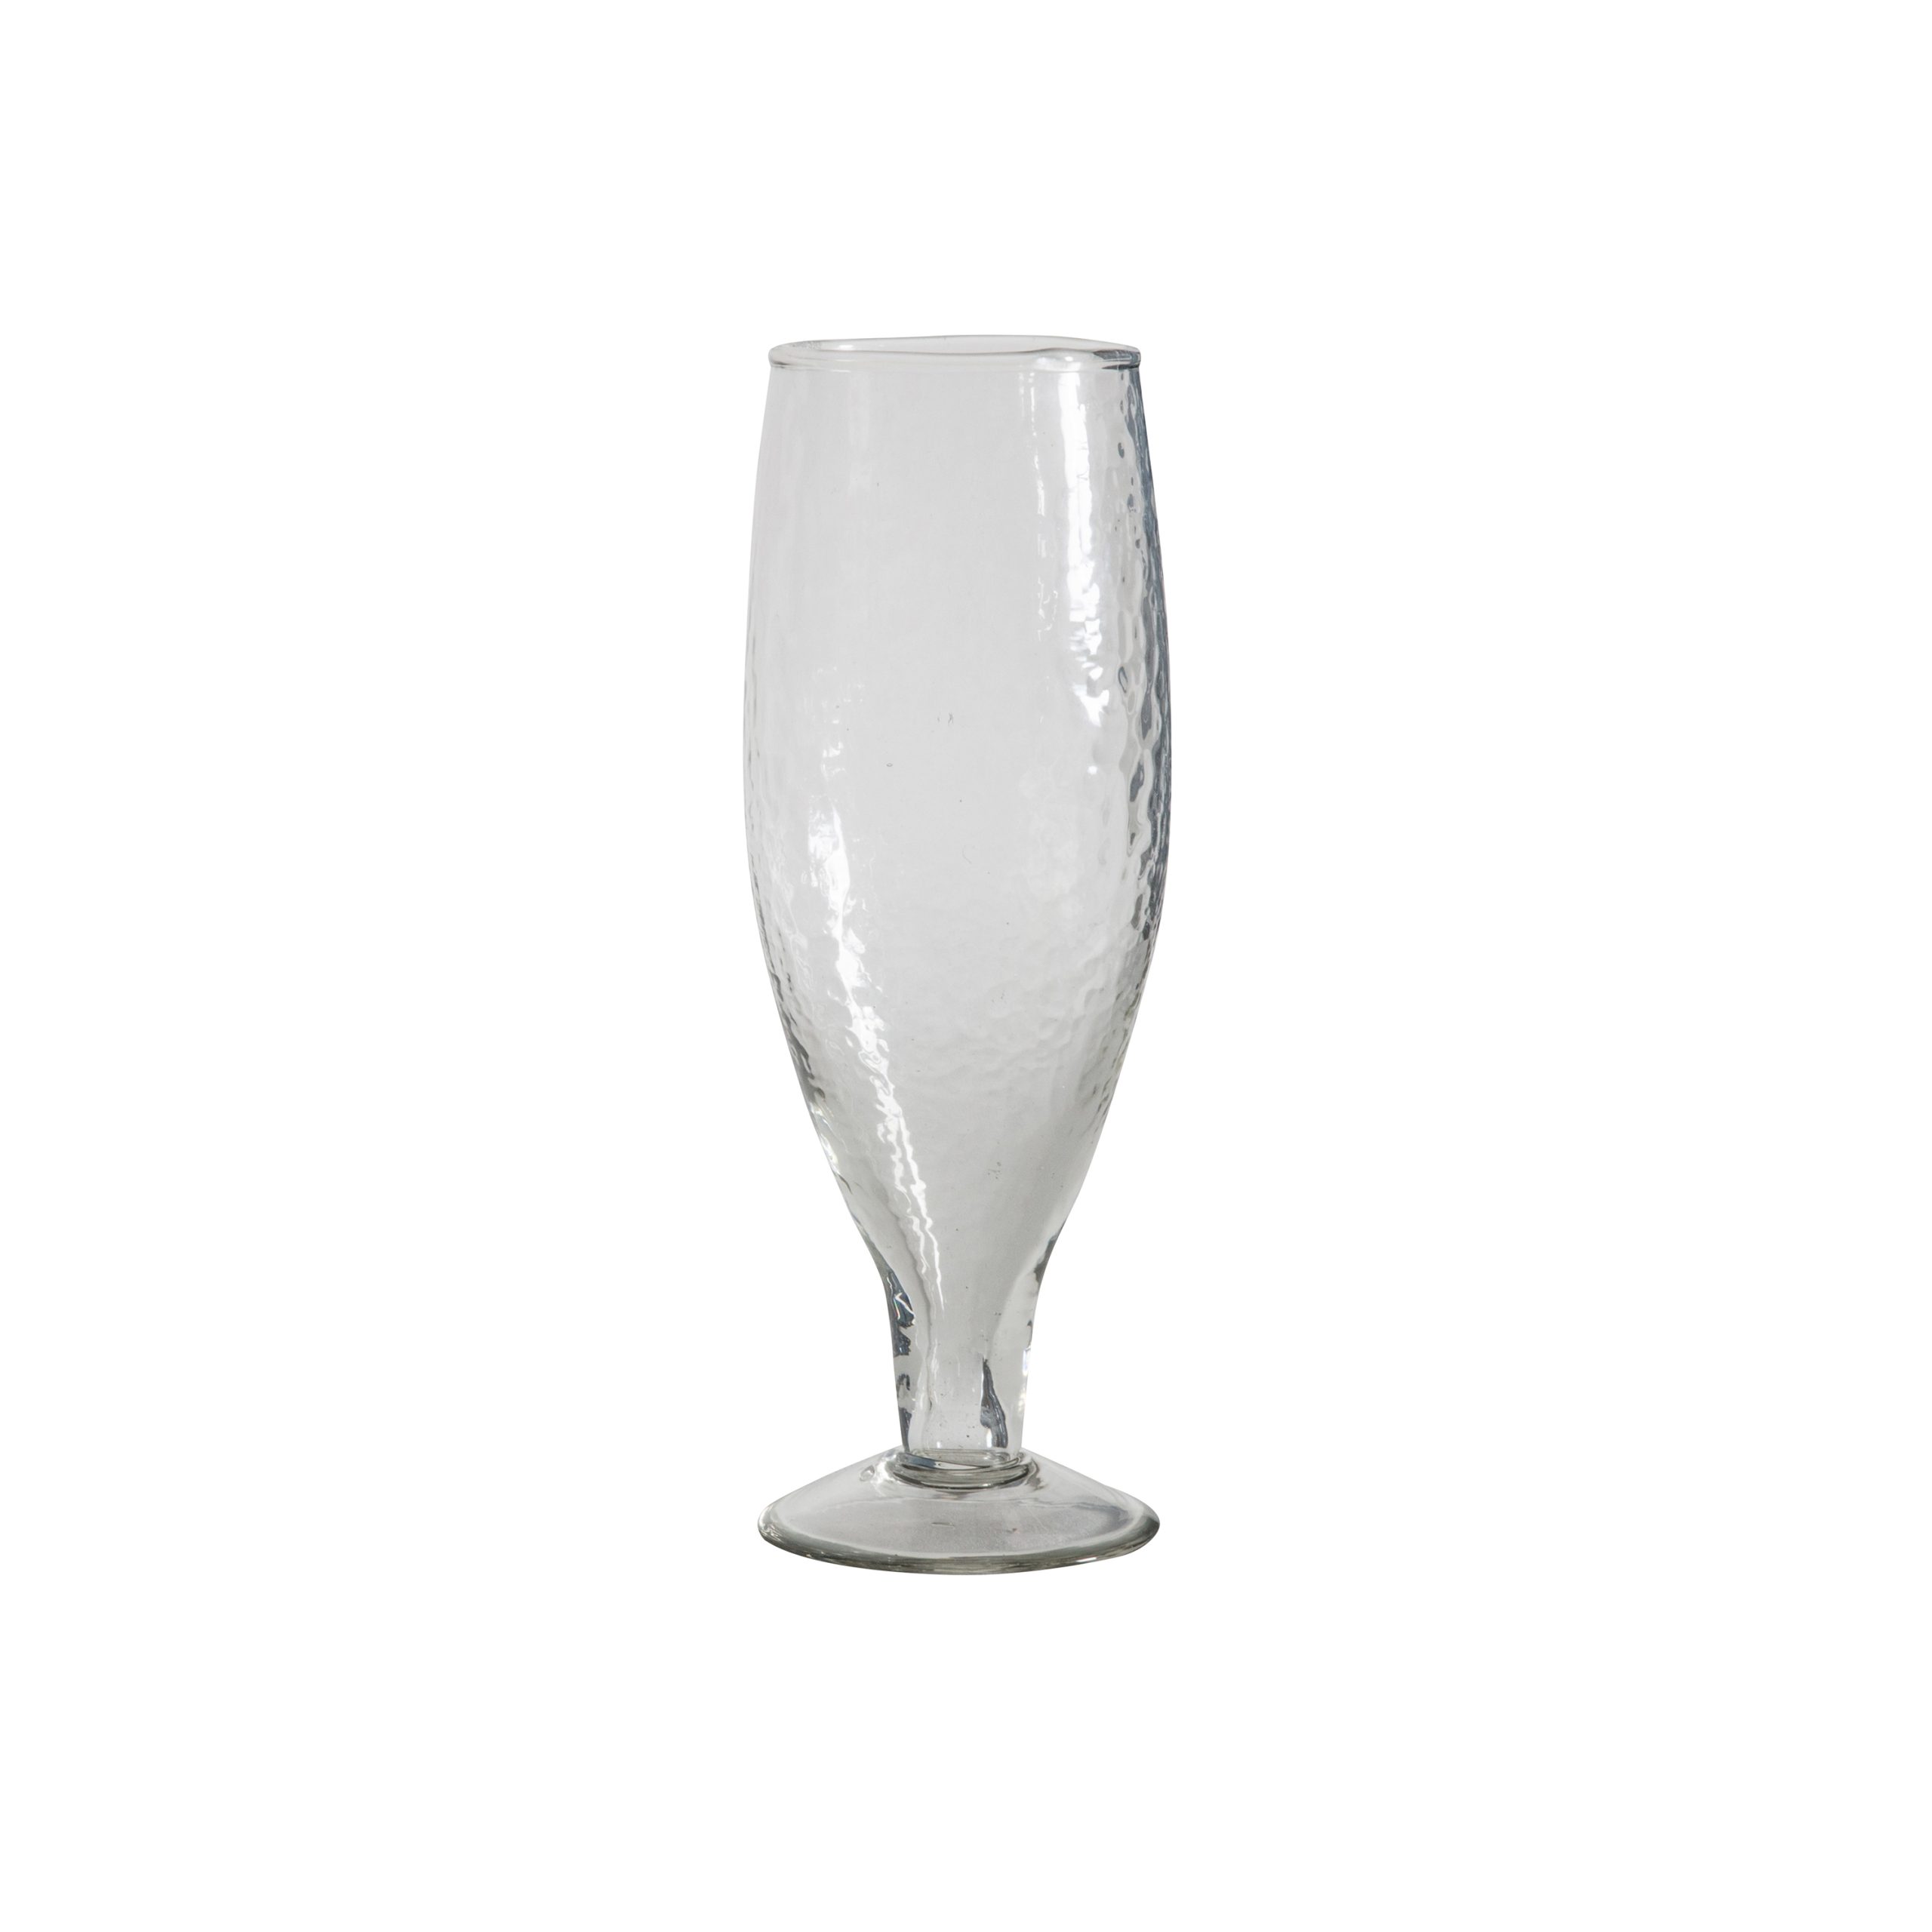 Gallery Direct Orkin Hammered Wine Glass (Pack of 4)